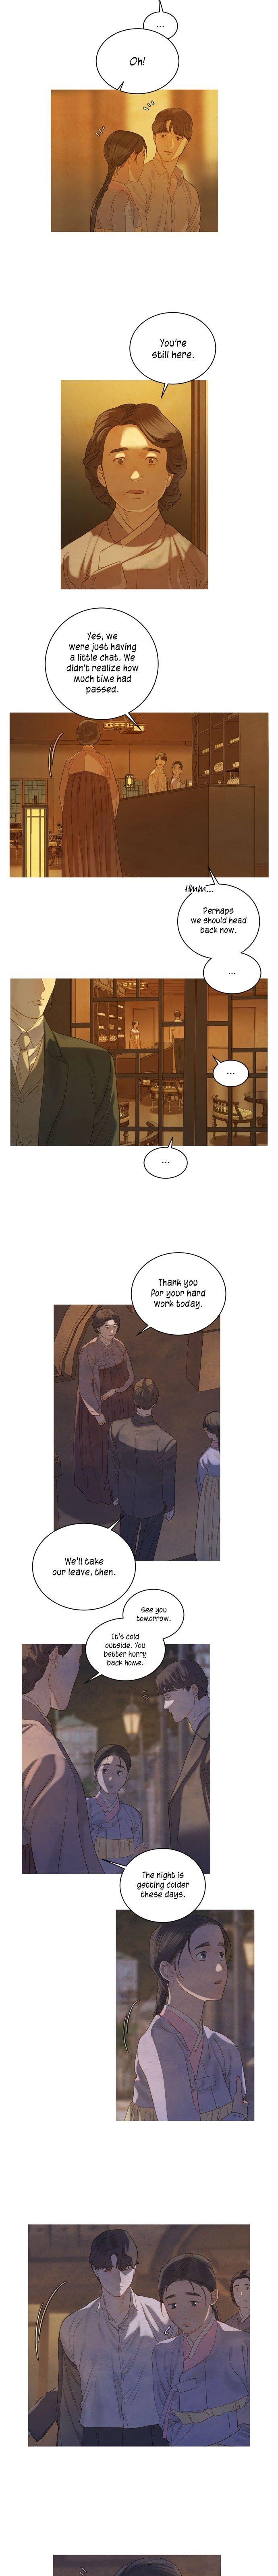 Gorae Byul - The Gyeongseong Mermaid - Chapter 31 Page 4